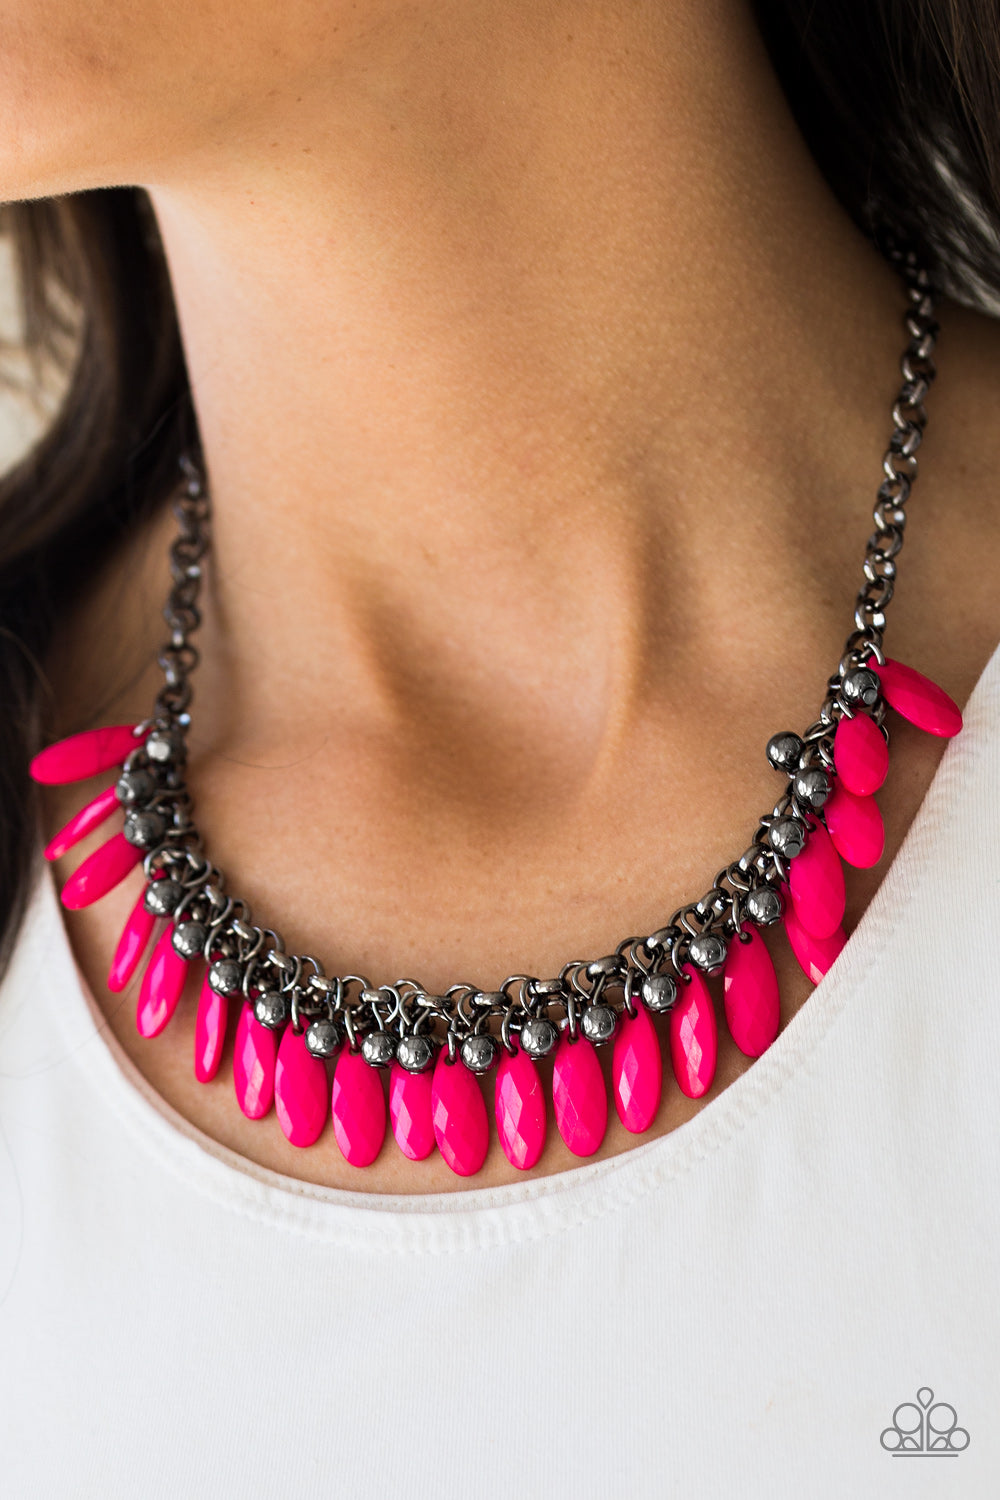 Paparazzi Accessories  - Jersey Shore #N221 Box 3 - Pink Necklace